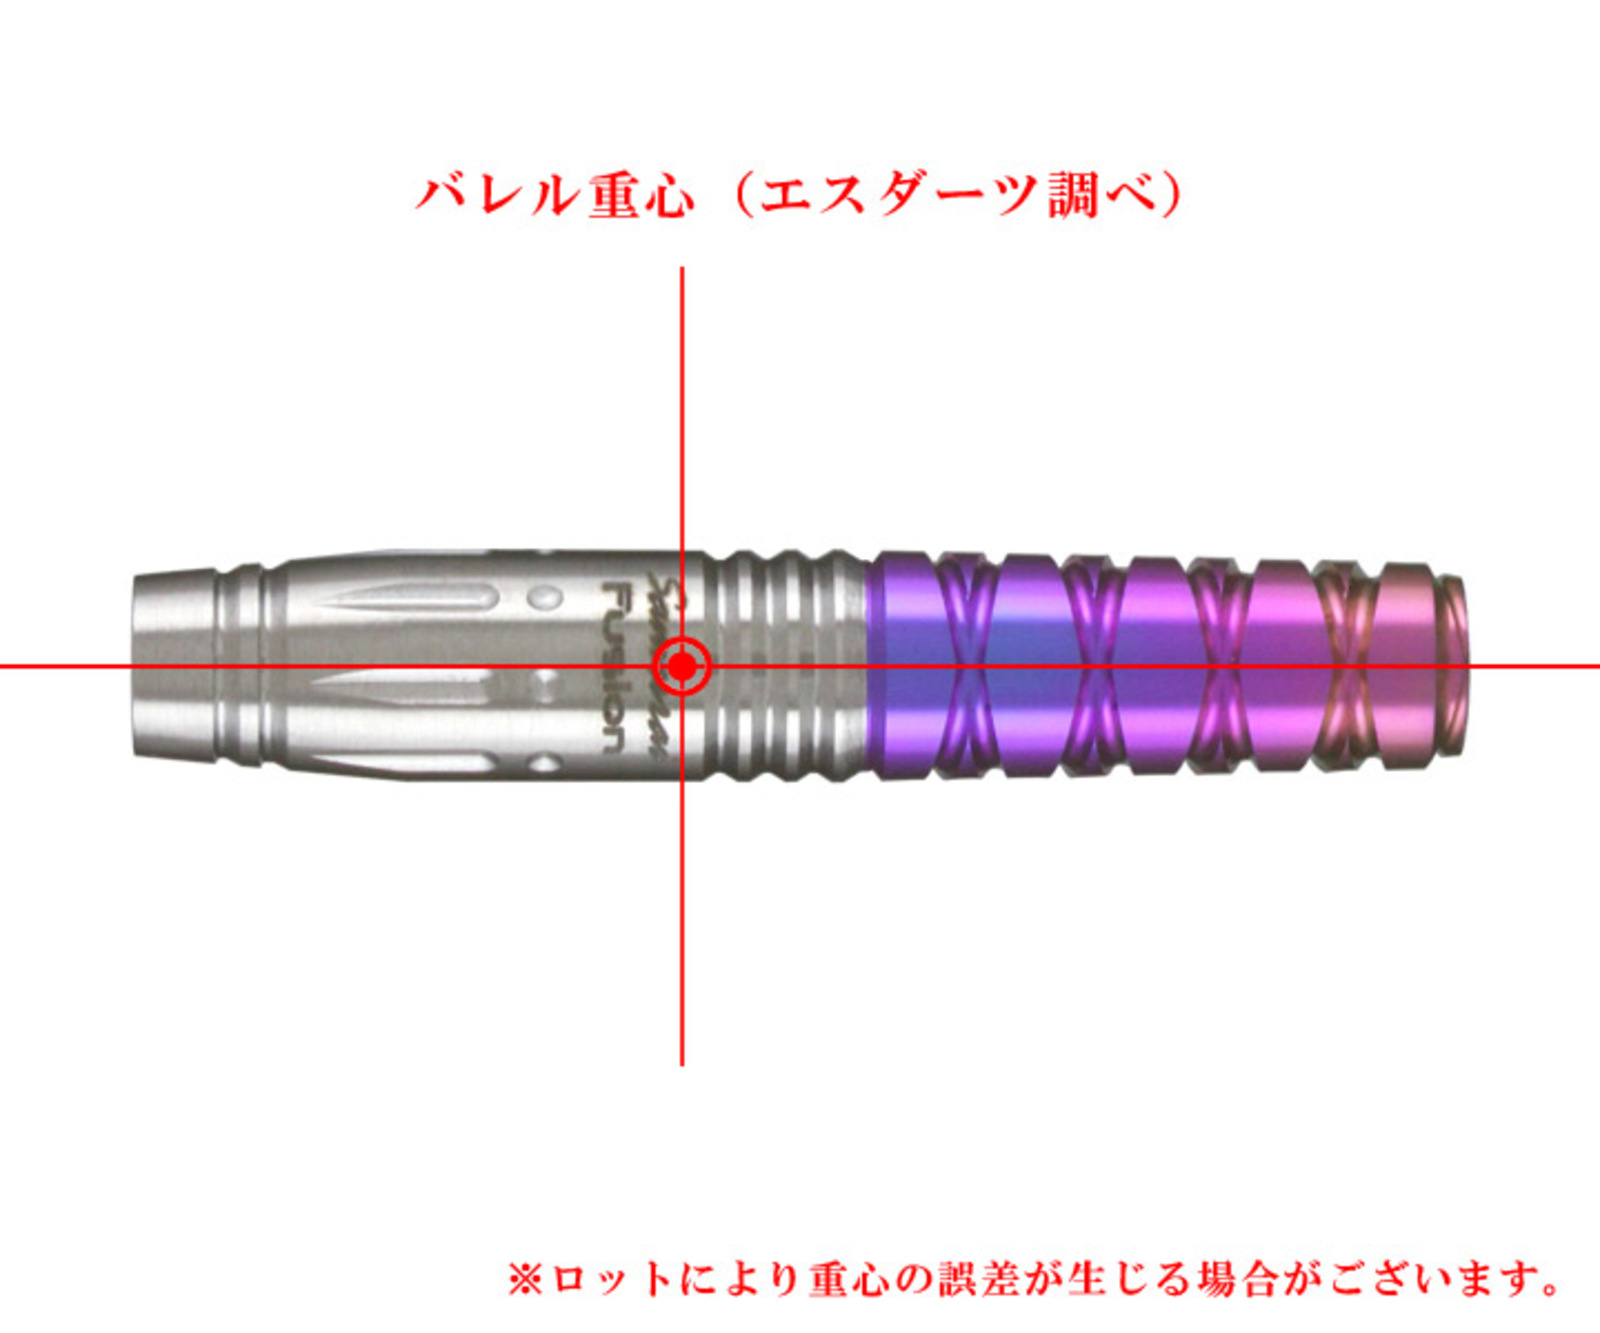 SAMURAI】FUSION HELICAL CX | Darts Online Shop S-DARTS from JAPAN.